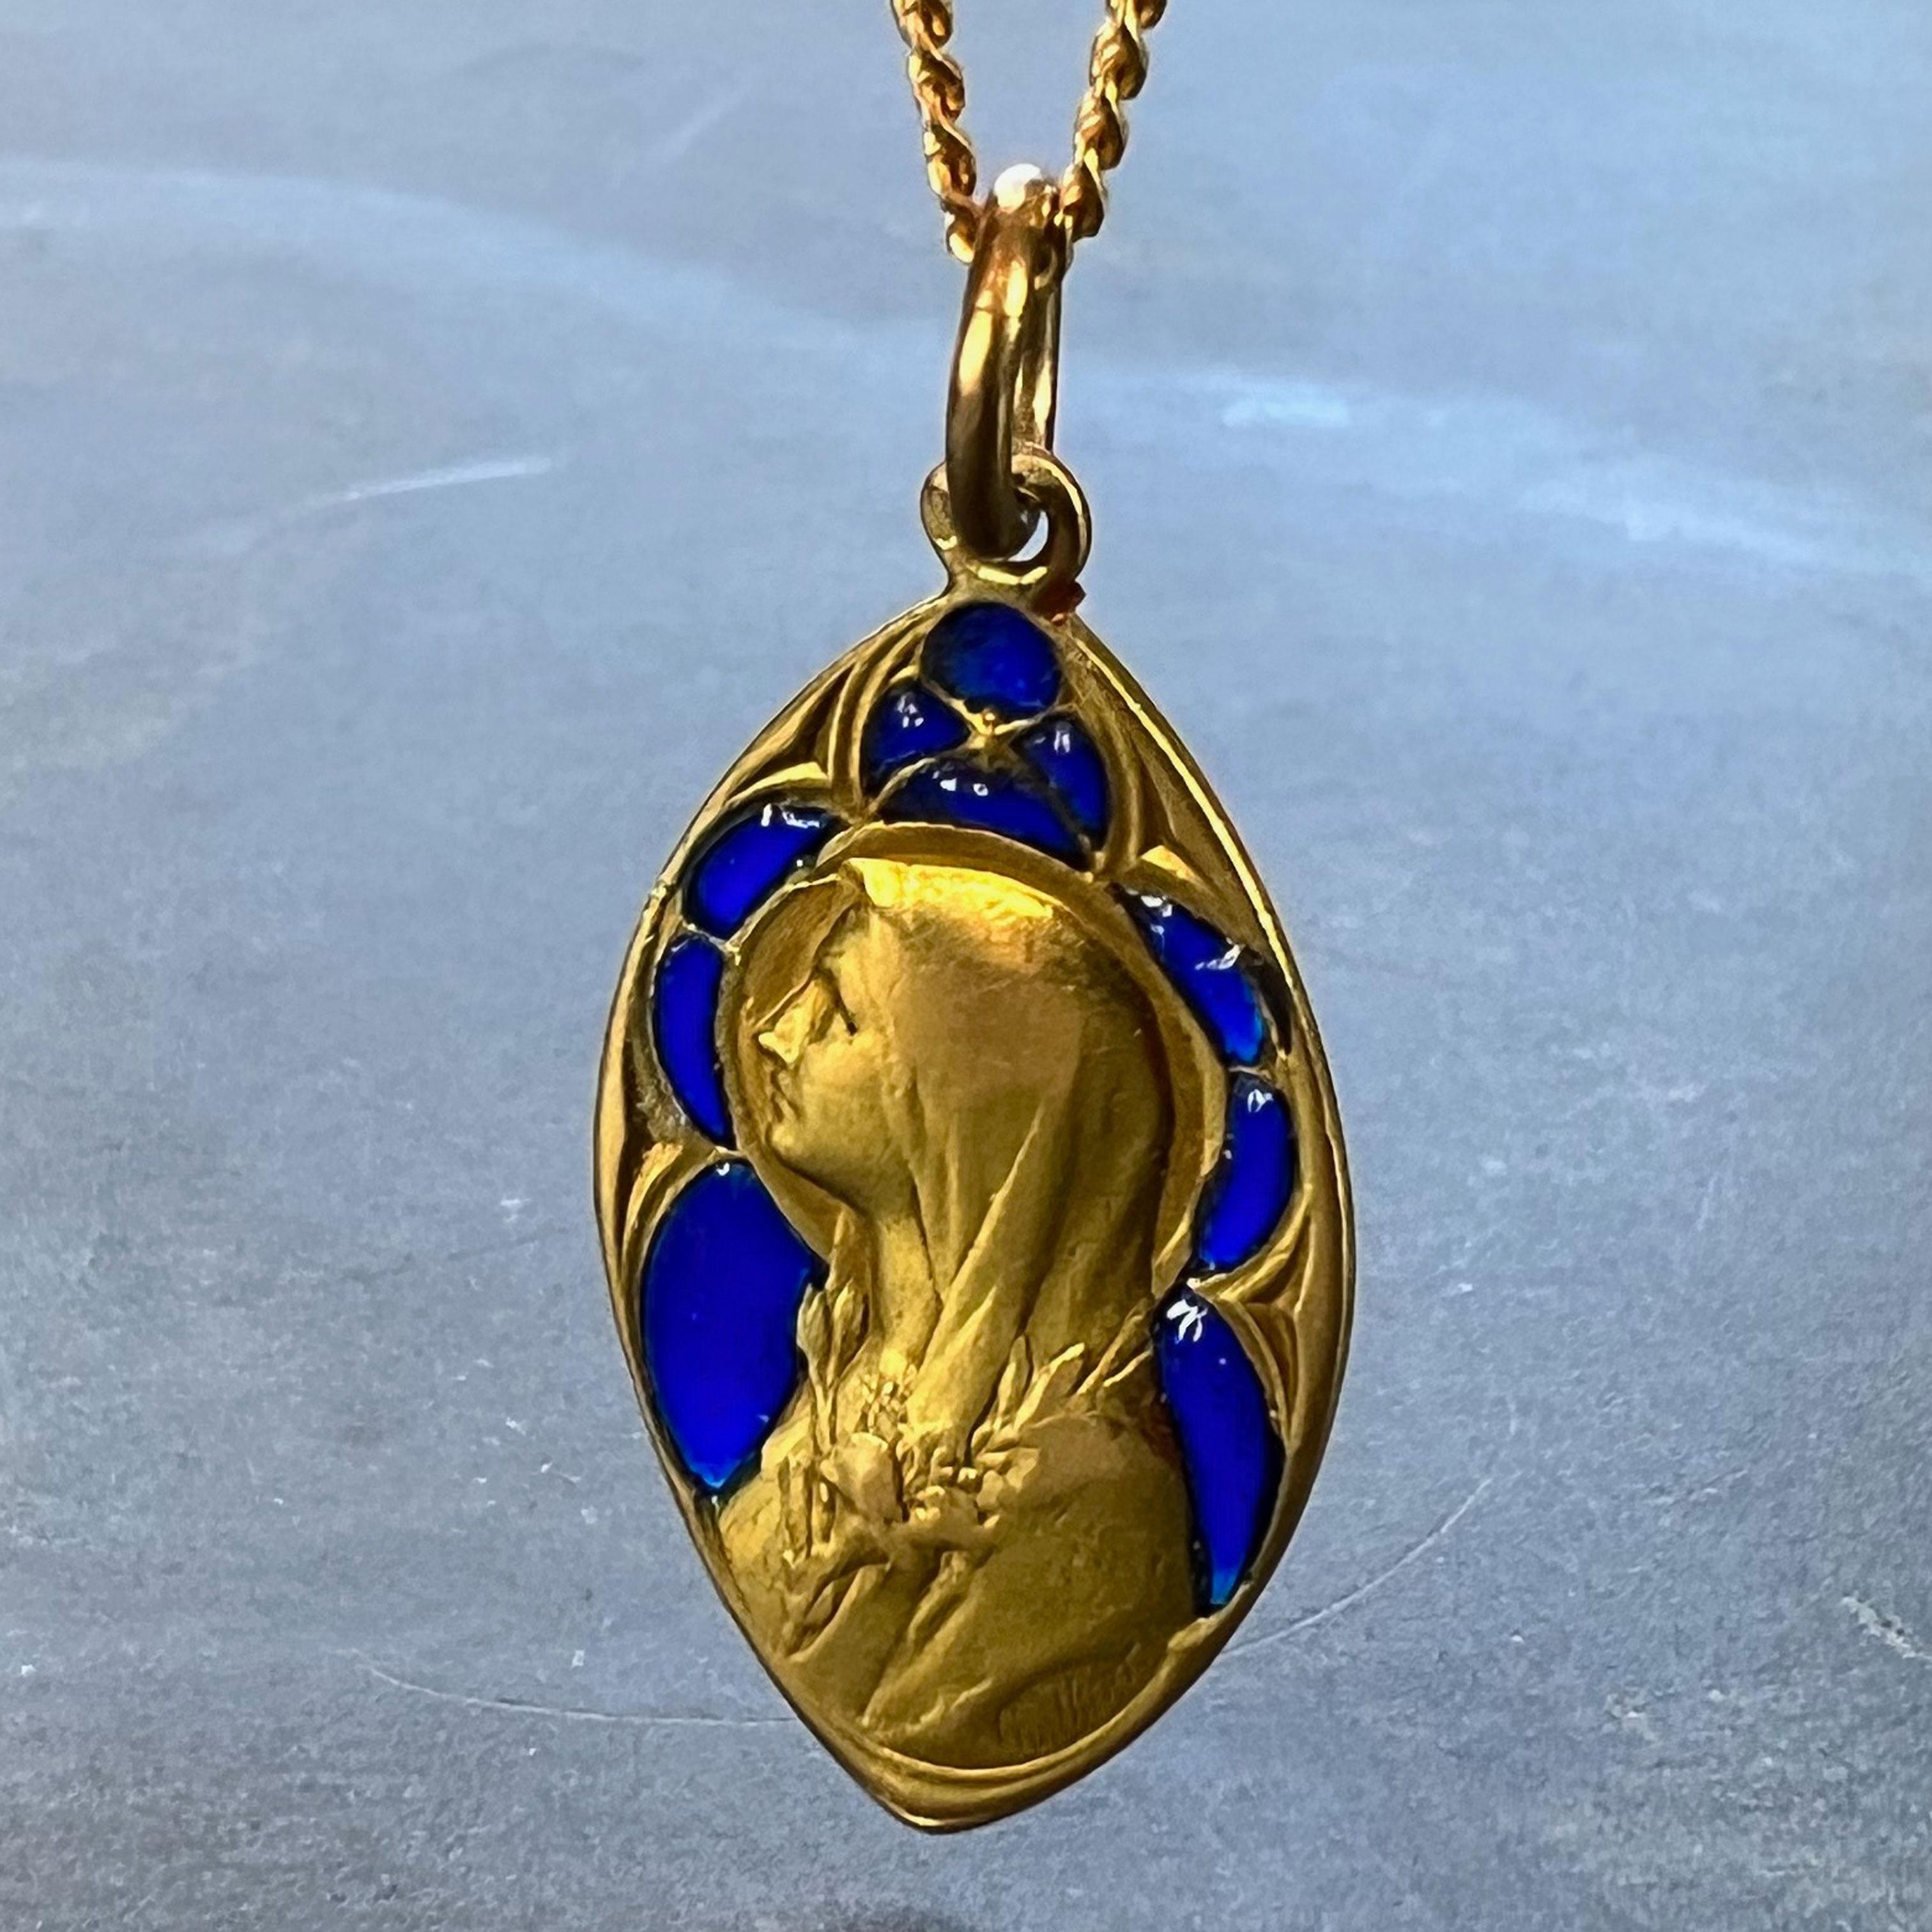 A French 18 karat (18K) yellow gold charm pendant designed as a navette shaped medal depicting the Virgin Mary with plique a jour blue enamel surround. Signed Guilbert, stamped with the eagle’s head for 18 karat gold and French manufacture, and a